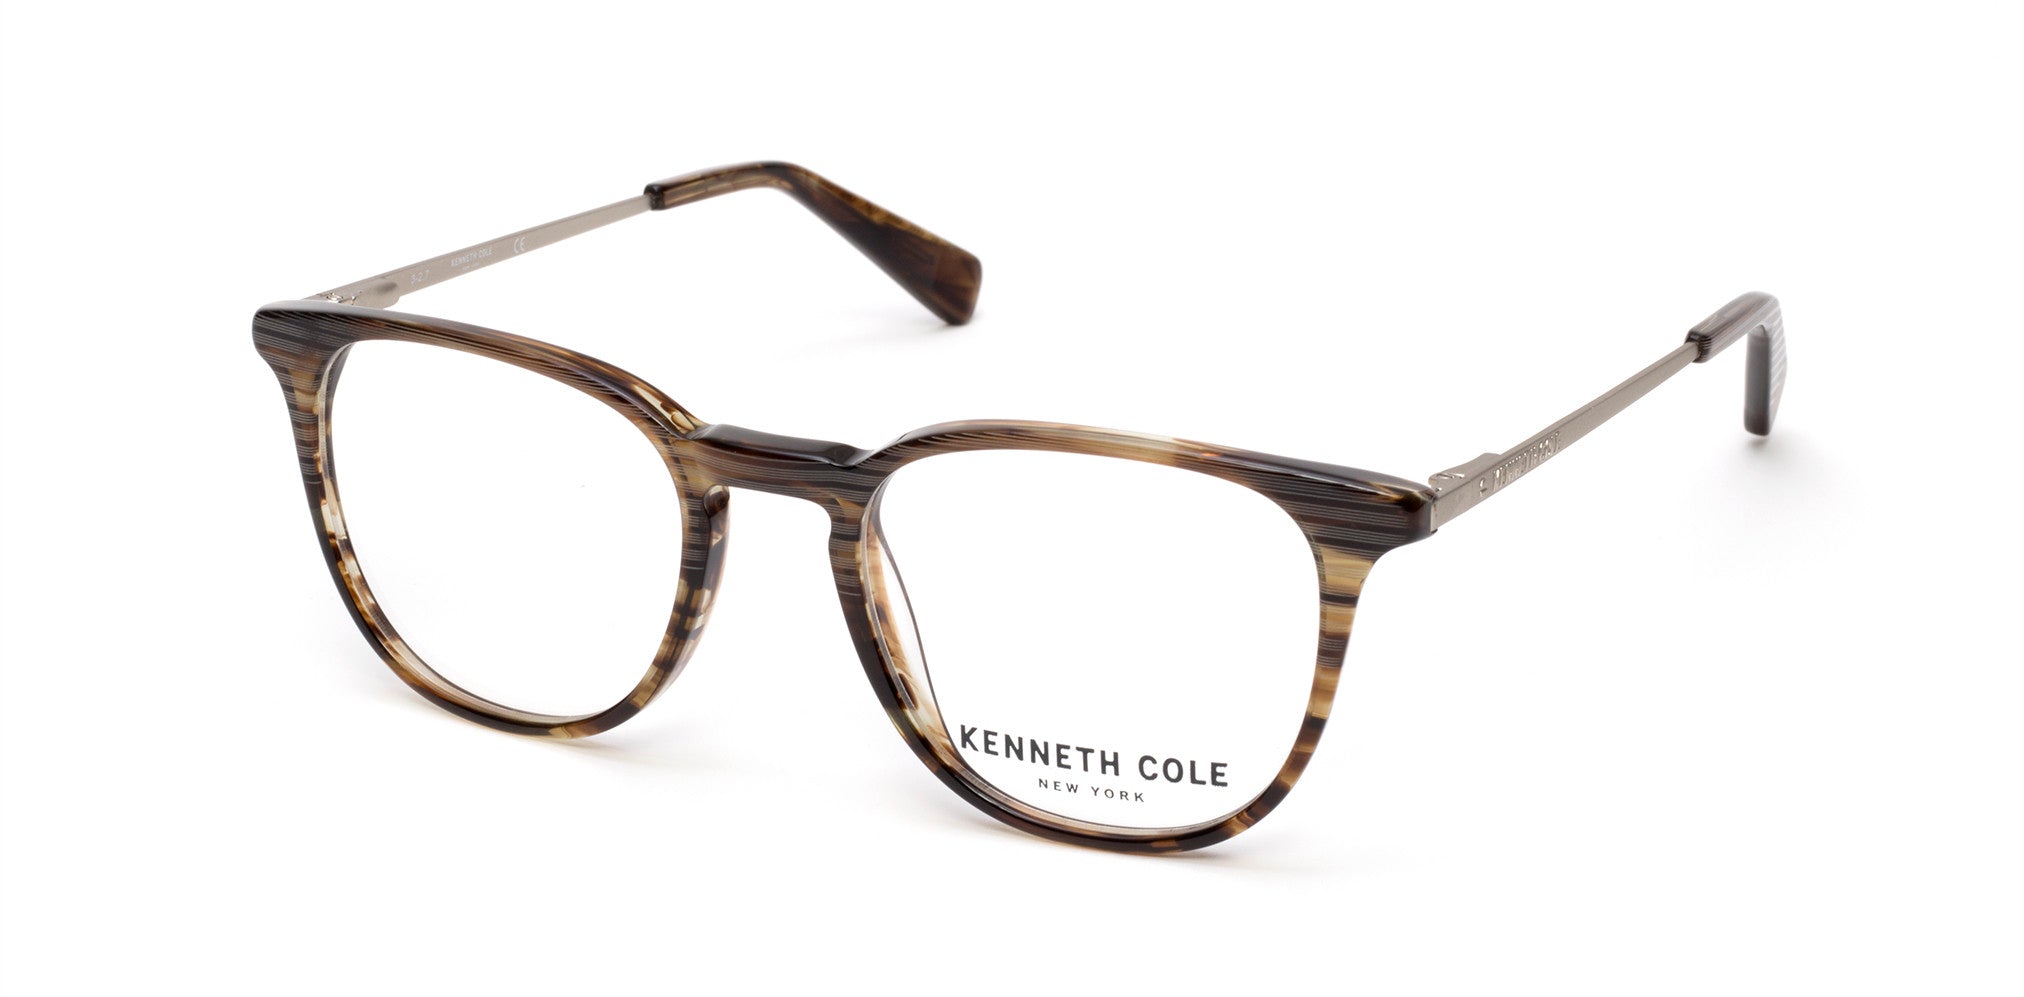 Kenneth Cole New York,Kenneth Cole Reaction KC0273 Round Eyeglasses 045-045 - Shiny Light Brown